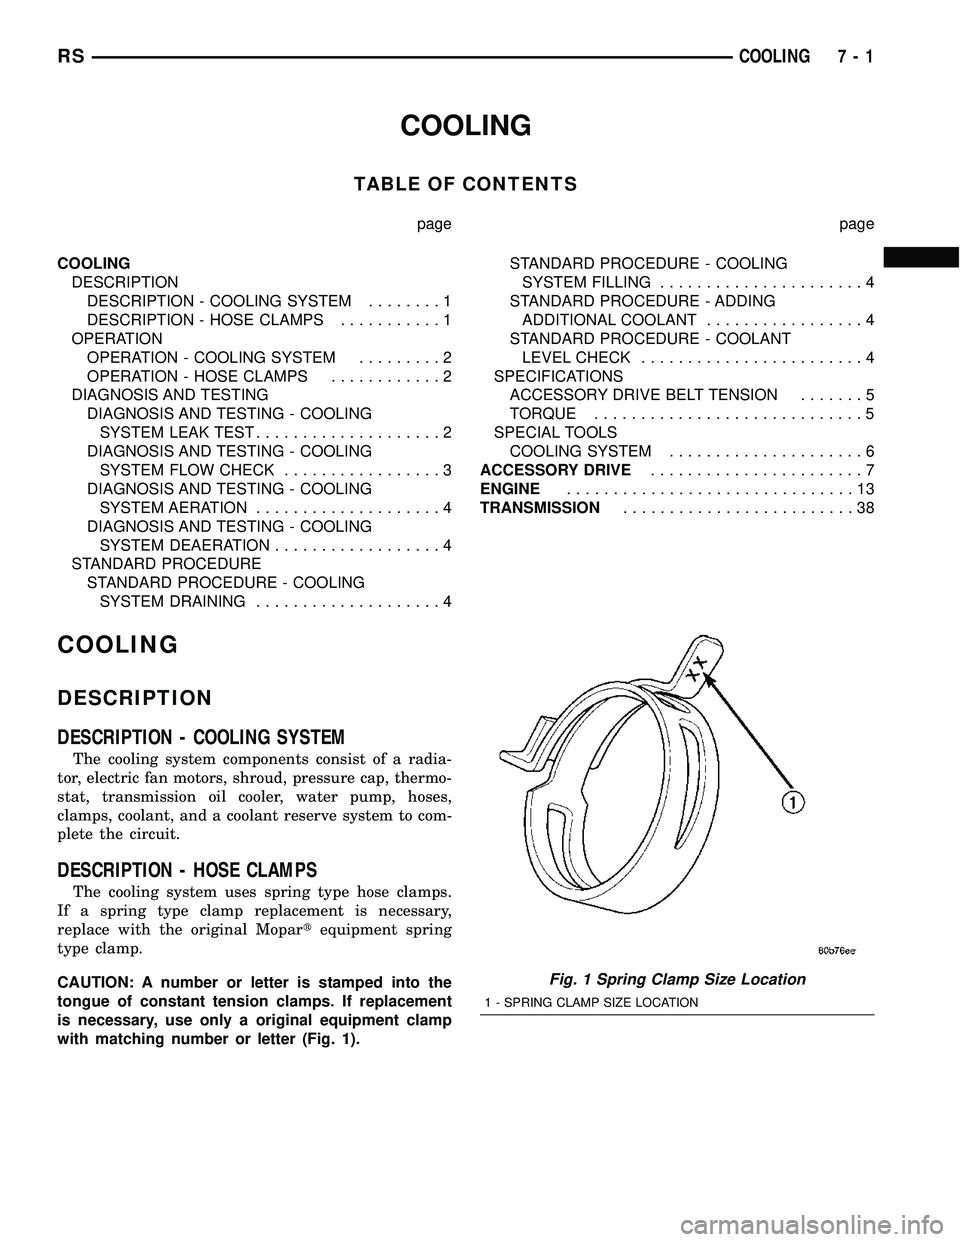 CHRYSLER CARAVAN 2005  Service Manual COOLING
TABLE OF CONTENTS
page page
COOLING
DESCRIPTION
DESCRIPTION - COOLING SYSTEM........1
DESCRIPTION - HOSE CLAMPS...........1
OPERATION
OPERATION - COOLING SYSTEM.........2
OPERATION - HOSE CLAM